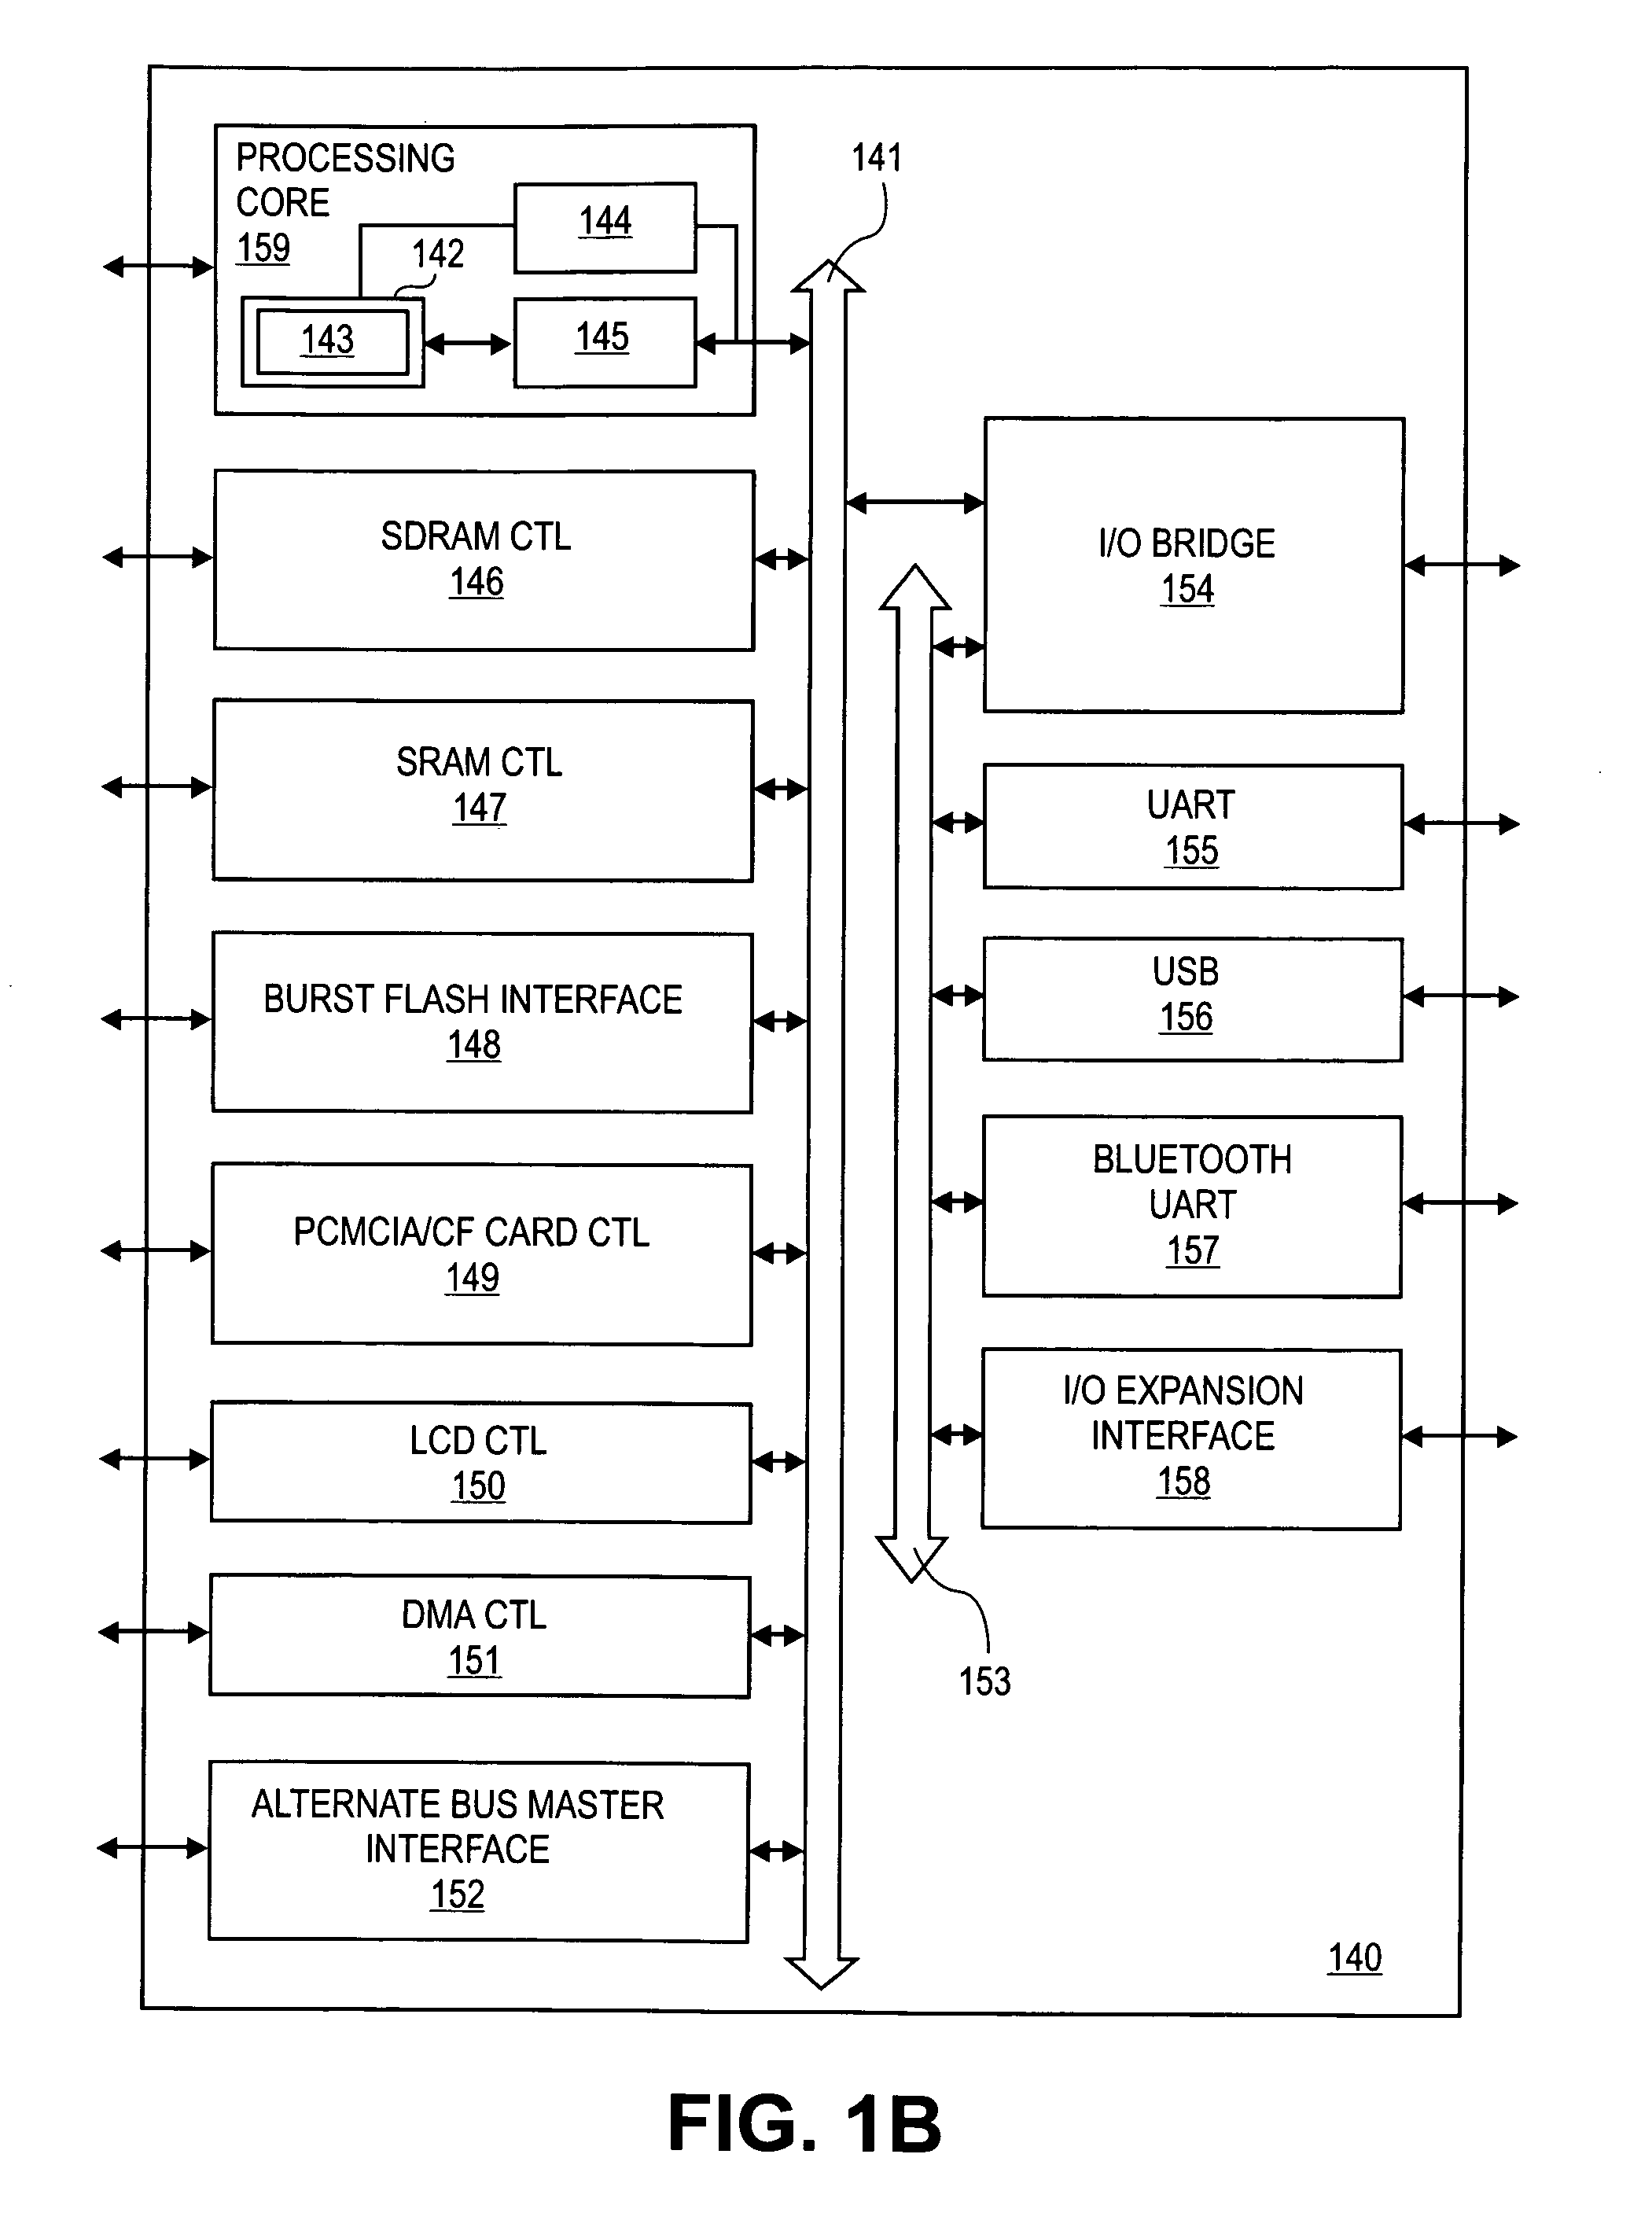 Instruction and logic for performing a dot-product operation